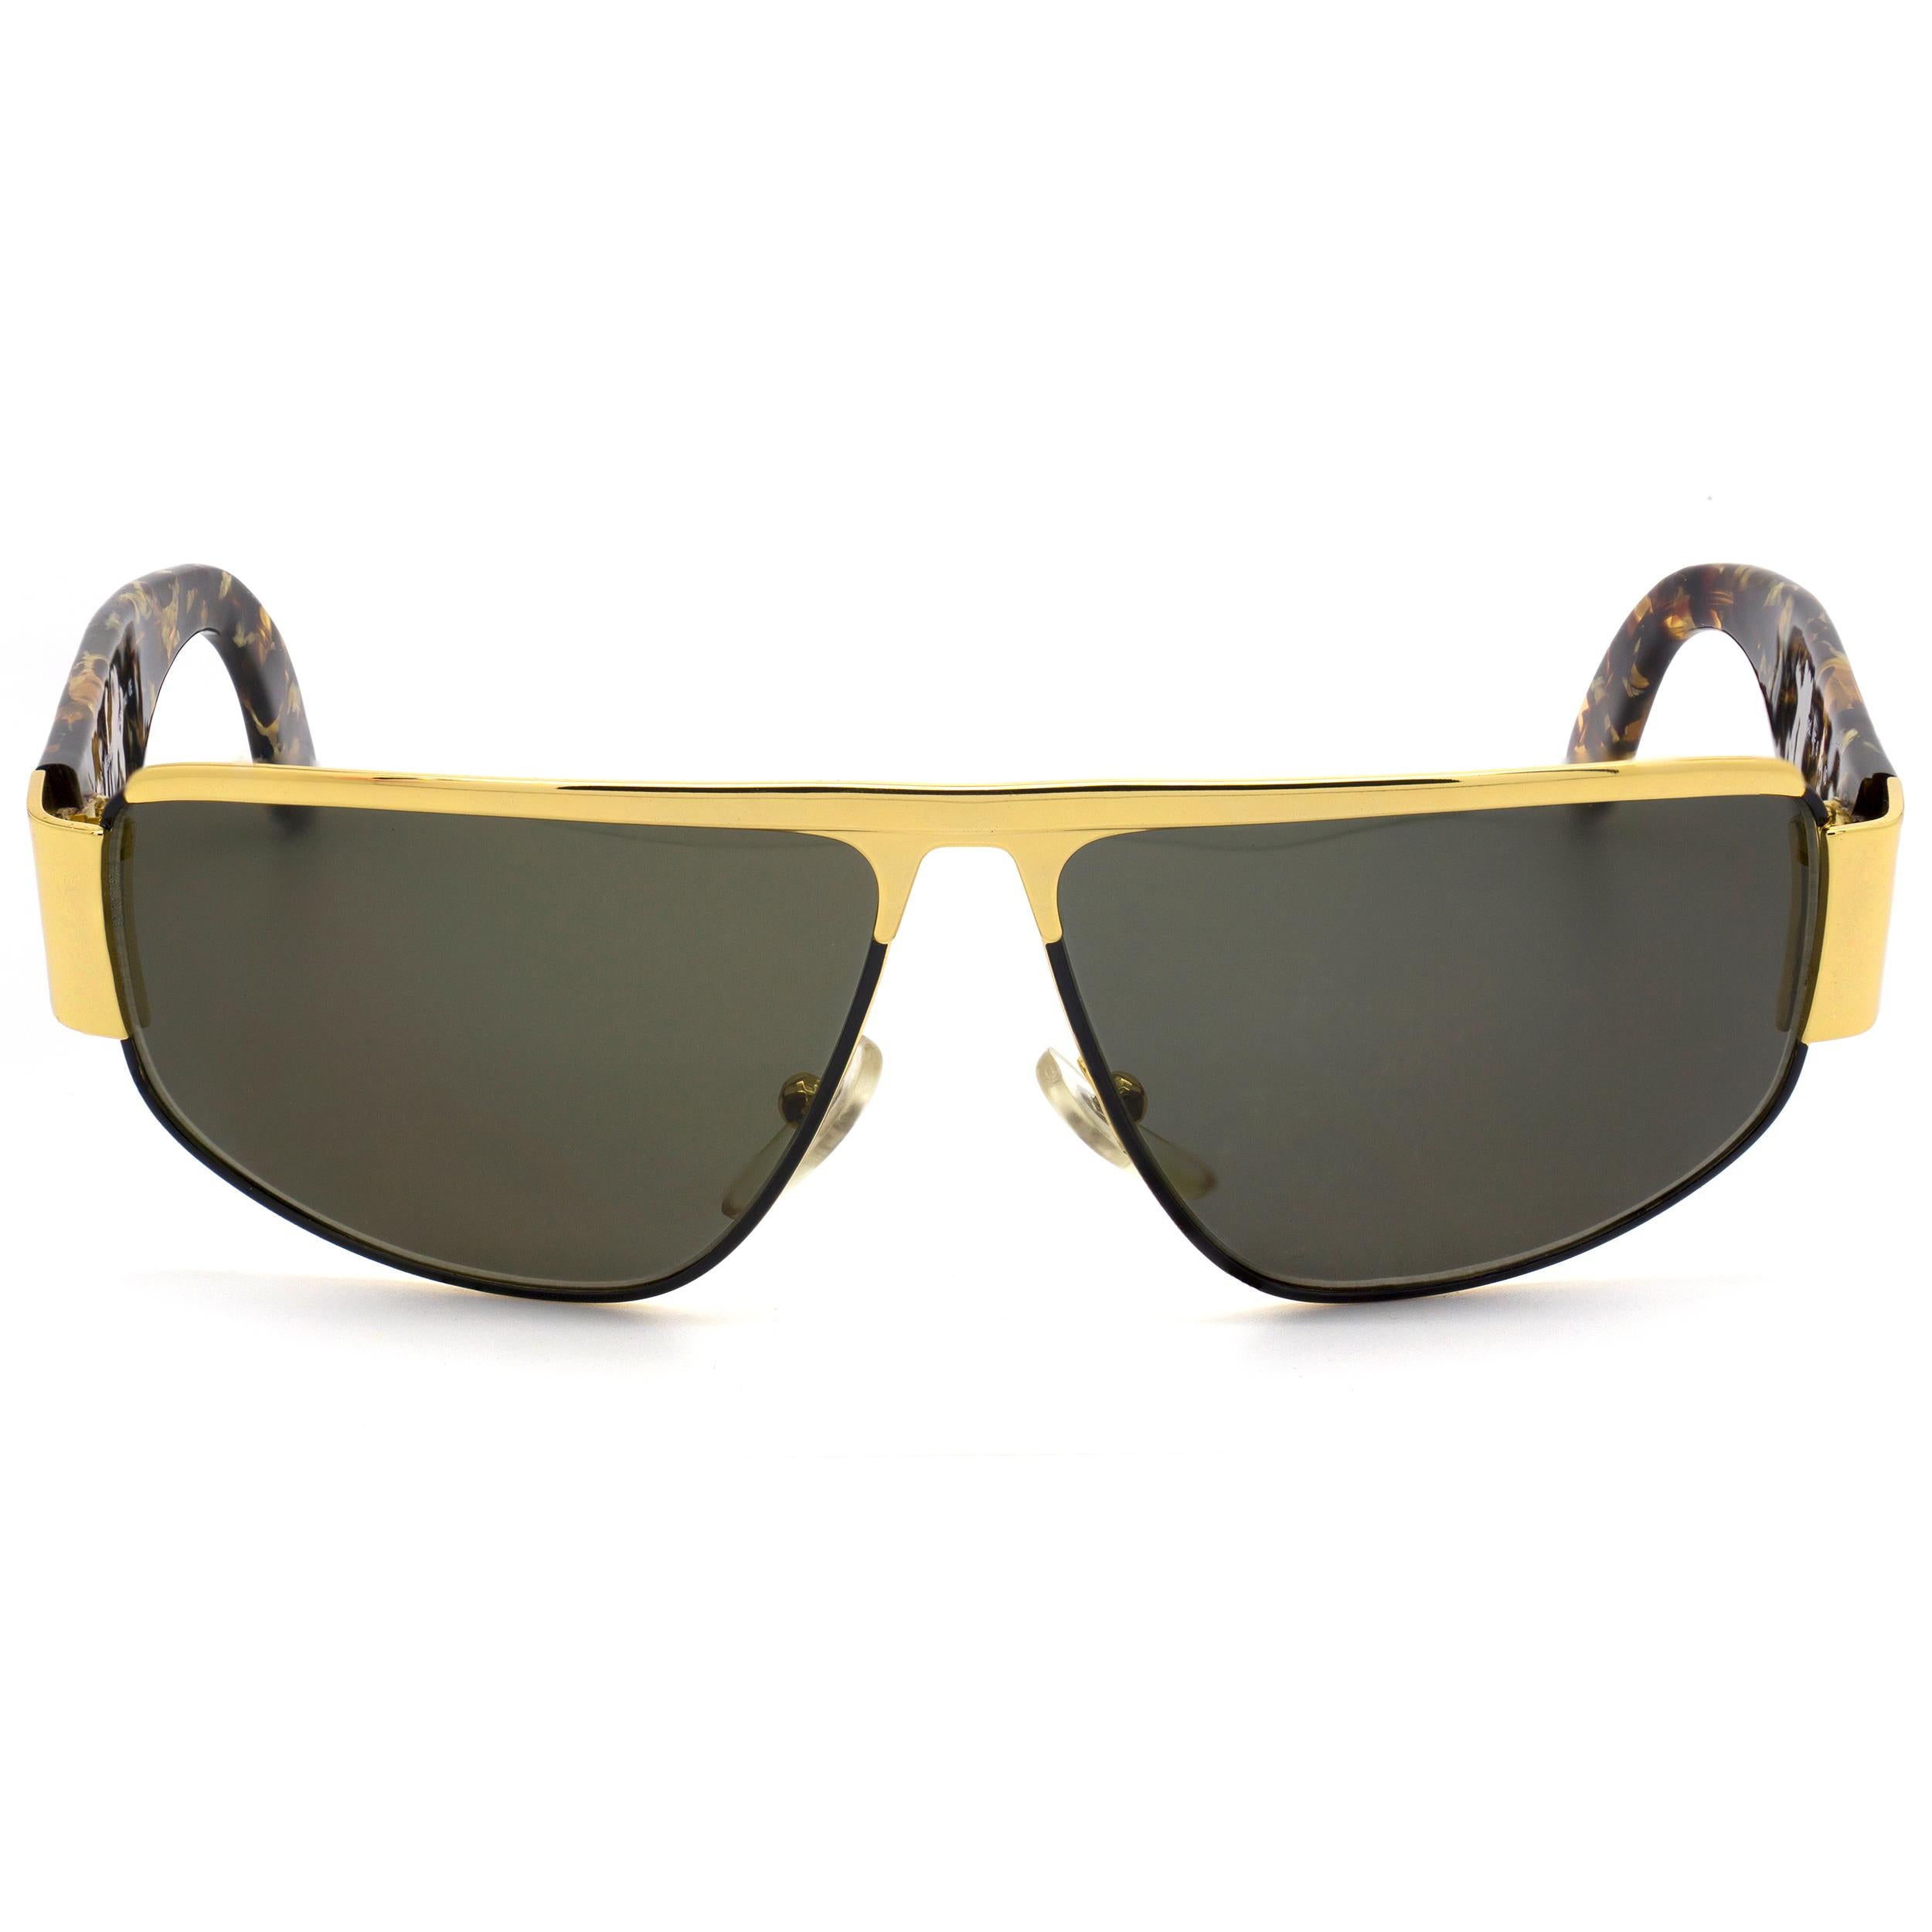 Prince Egon von Furstenberg vintage sunglasses 80s

Before Diane, there was Egon. Egon was a prince from Switzerland and he married Diane and thus made Diane Von Furstenburg a princess. An acclaimed fashion designer, he was a contemporary of Gianni